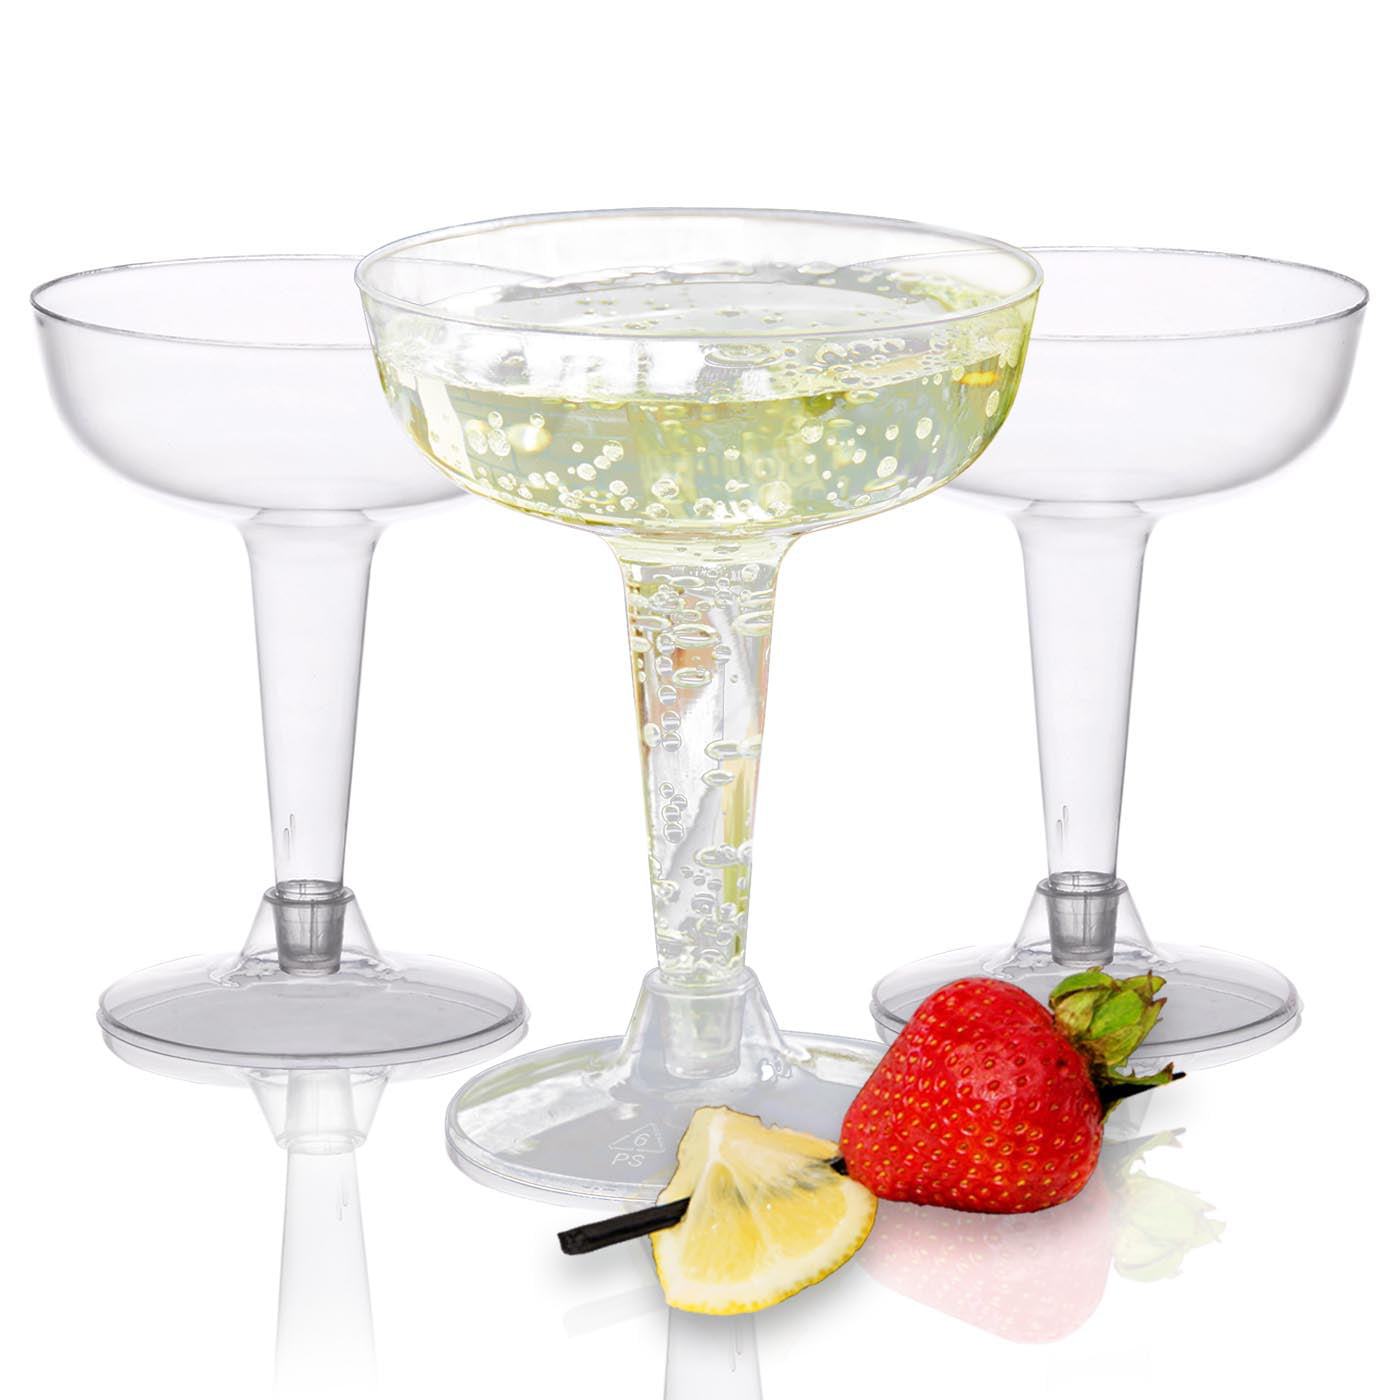 Plastic Margarita Glasses Birthday Parties & All Occasions Bulk Catering Party Cocktail Drinking Cups for Wedding 288 Pcs Disposable Hard Plastic Clear Martini Glasses 6 oz Margarita Glasses 